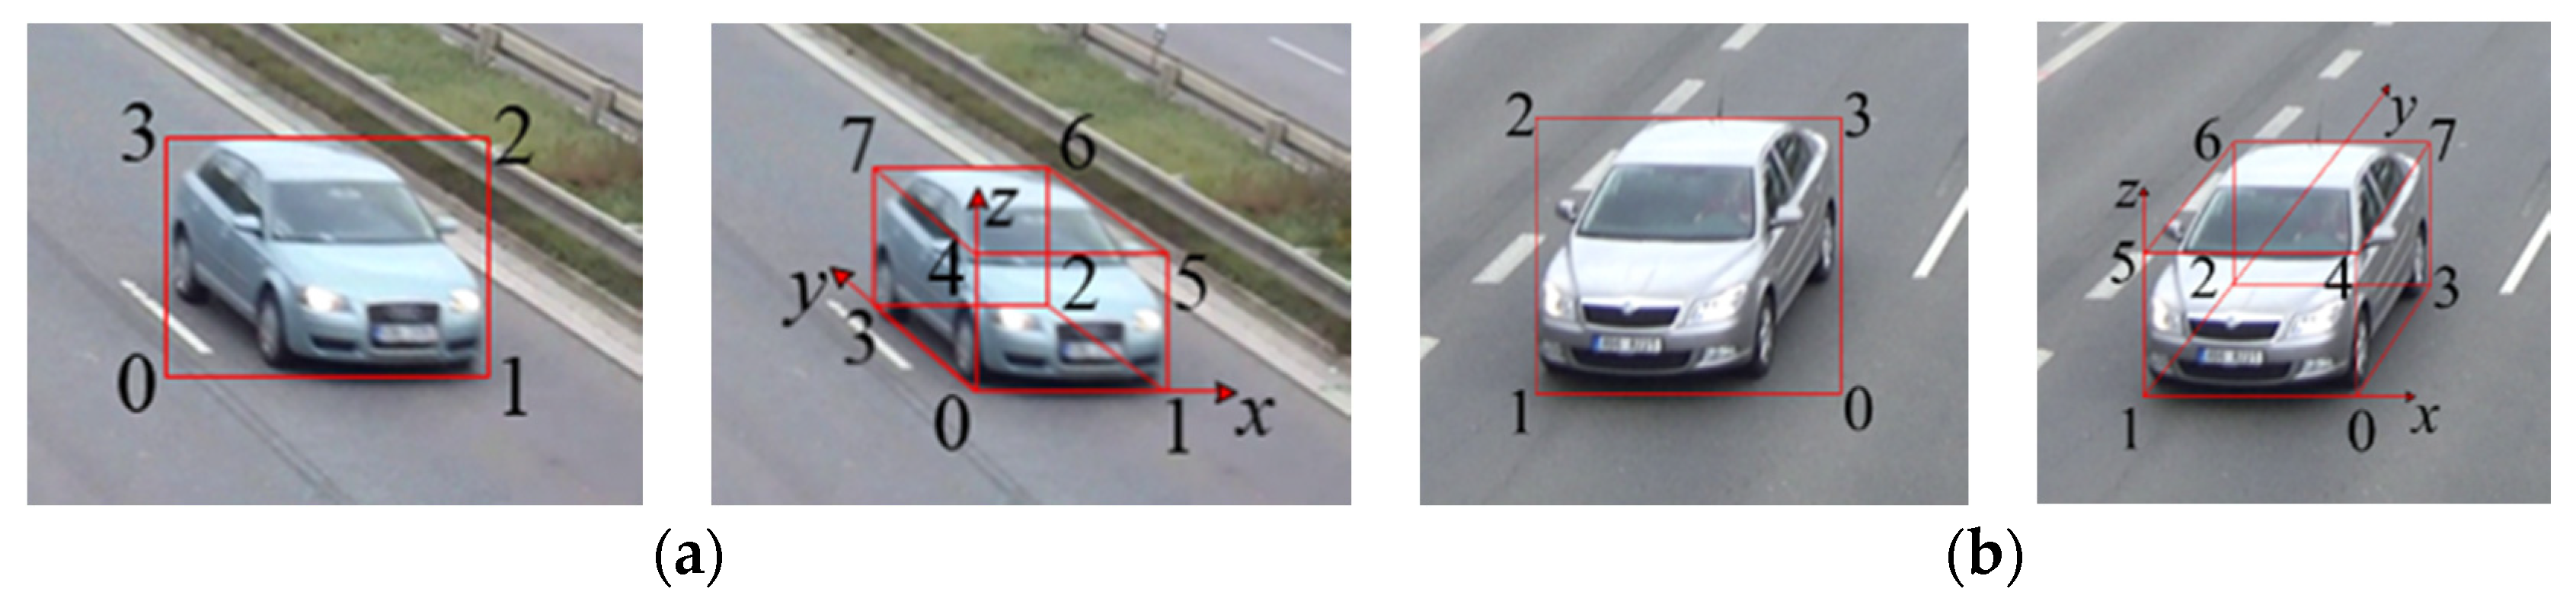 Sensors | Free Full-Text | Vehicle Spatial Distribution and 3D Trajectory  Extraction Algorithm in a Cross-Camera Traffic Scene | HTML